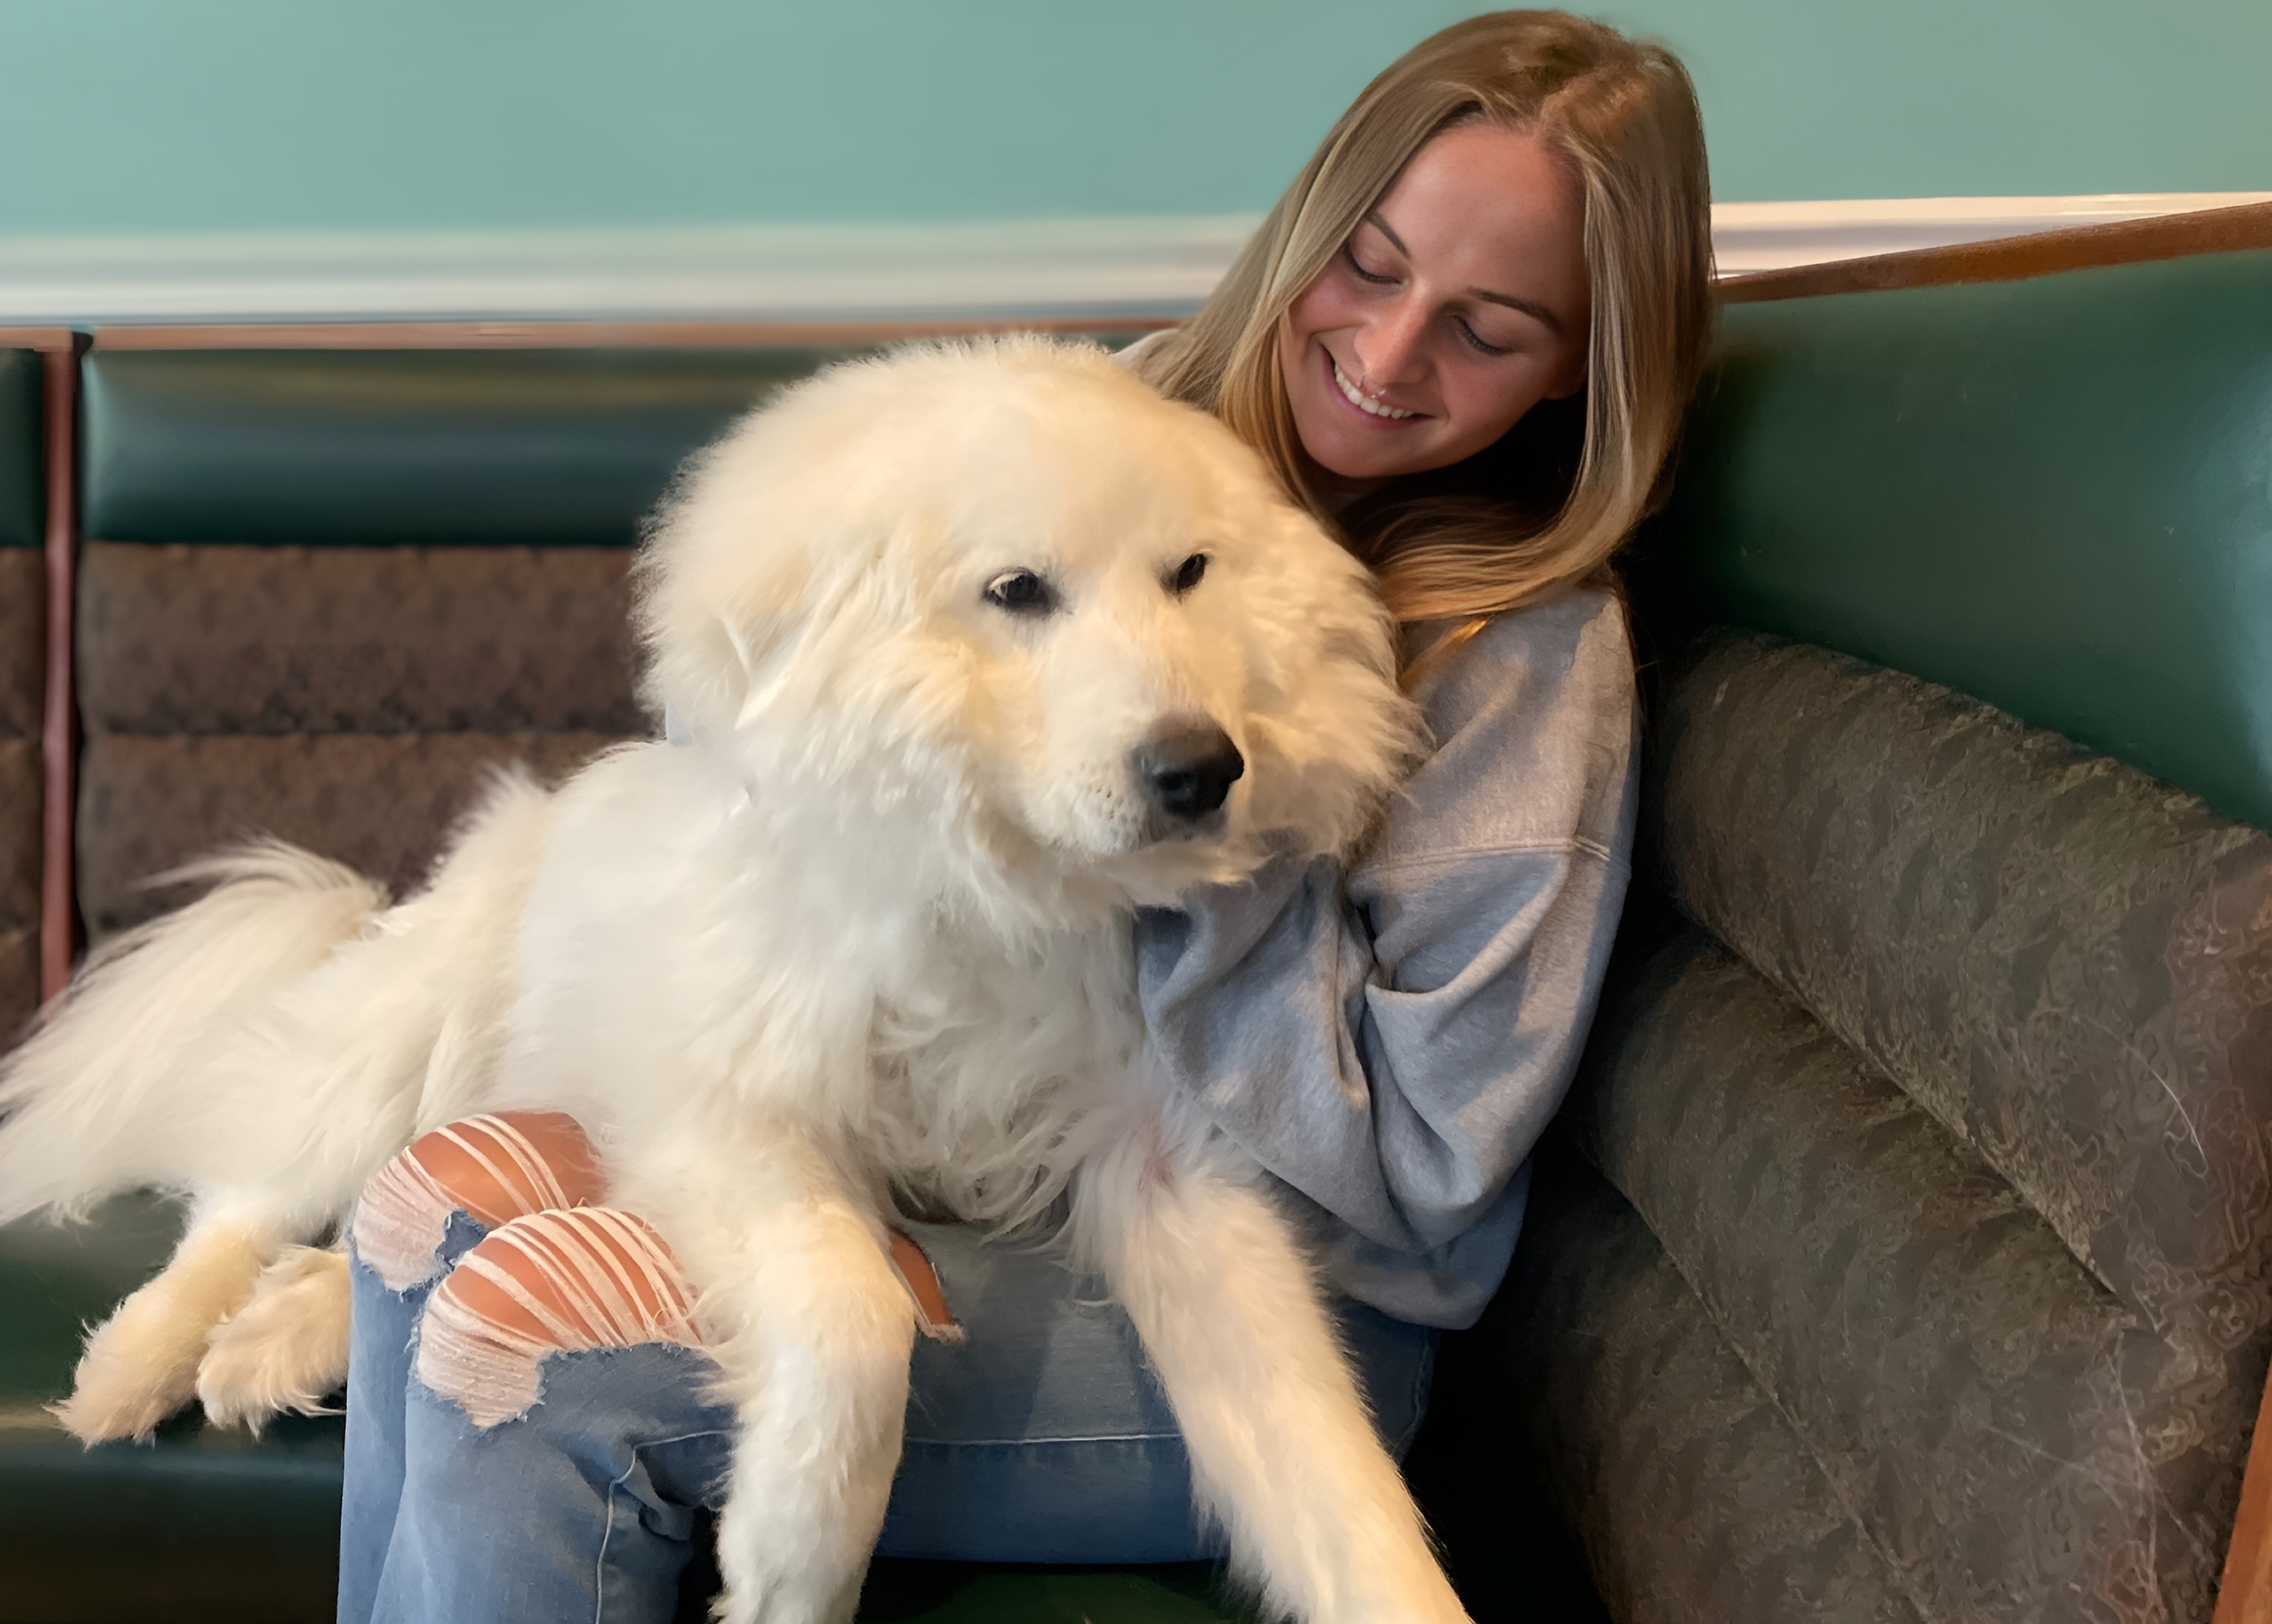 China the bar mascot, a white Great Pyrenees dog, and her owner Colby, the bar manager, sitting on the couch at Midtown Kava Lounge while smiling